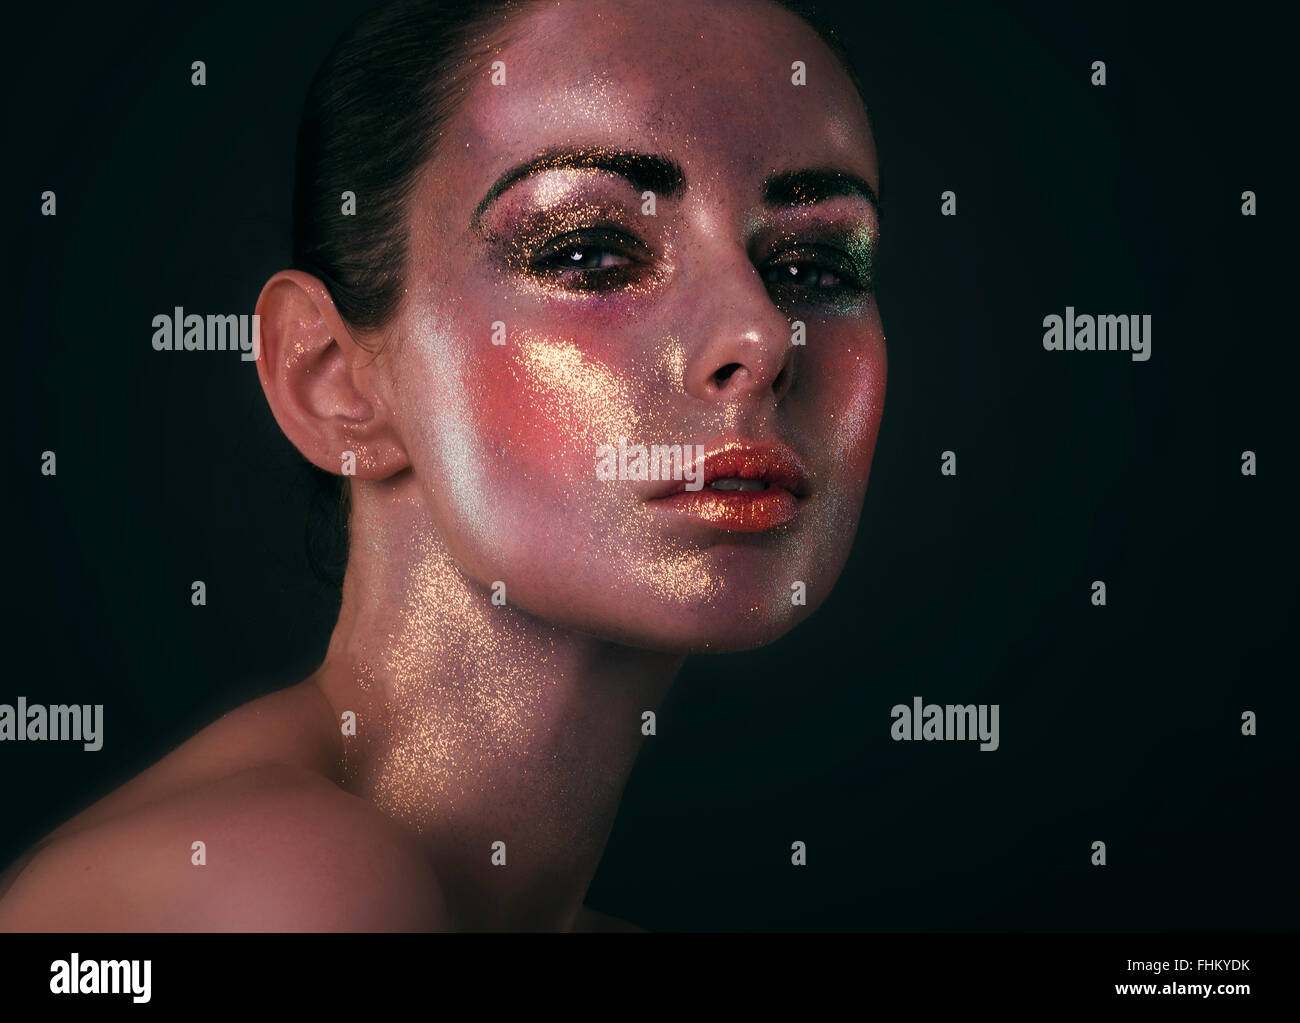 Fashion model with glitter make up covering whole face, lots of sheen and sparkle Stock Photo